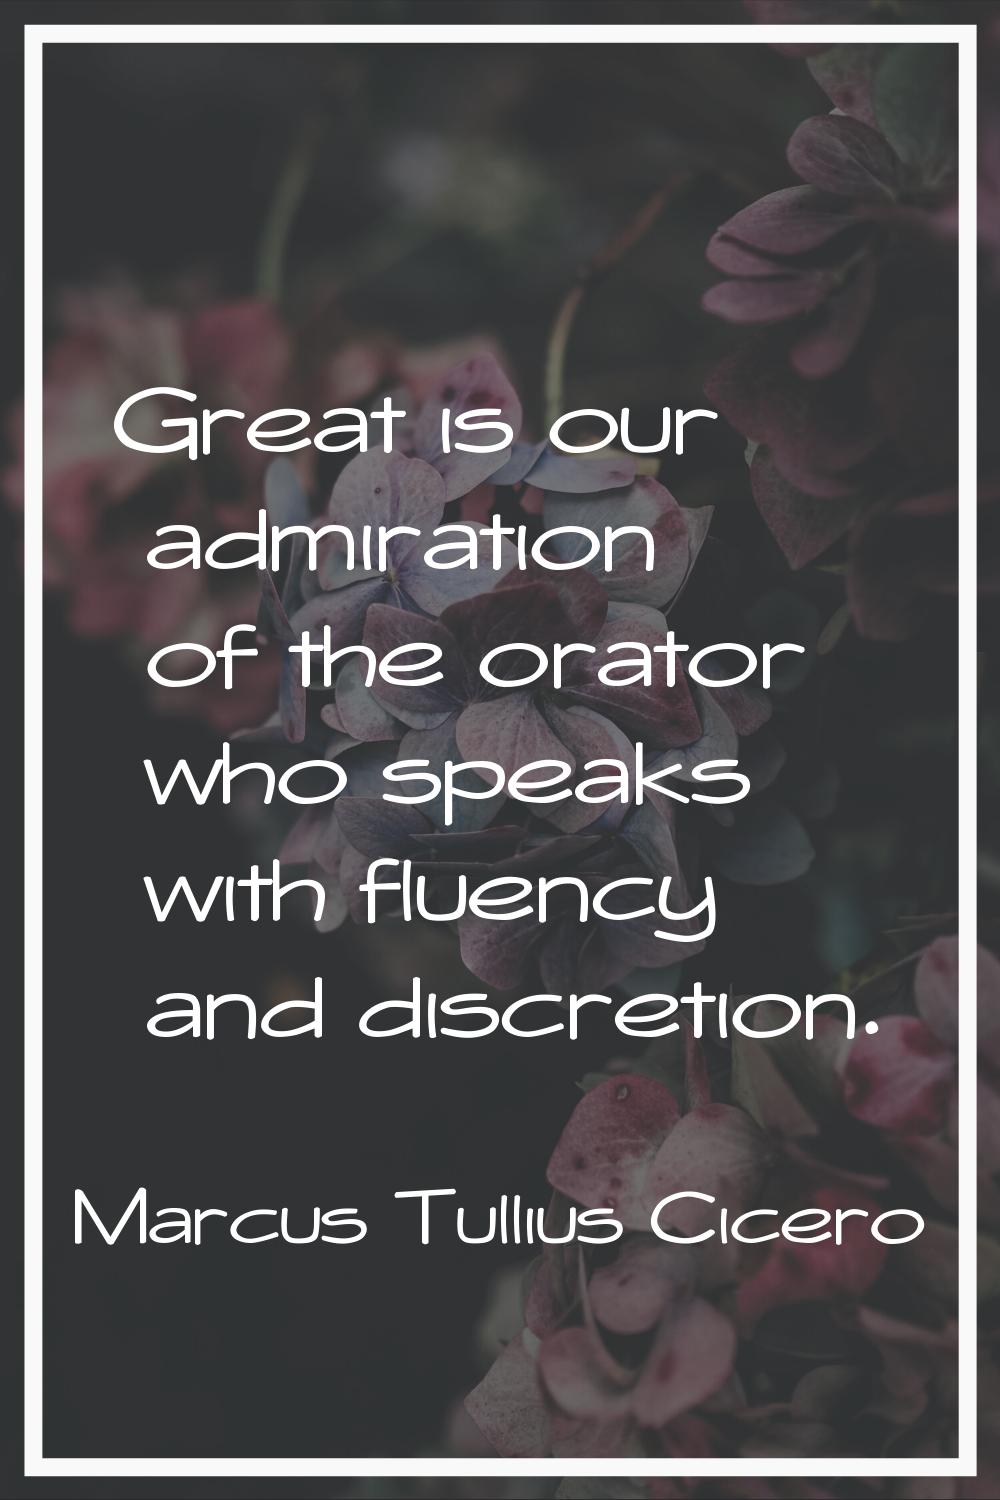 Great is our admiration of the orator who speaks with fluency and discretion.